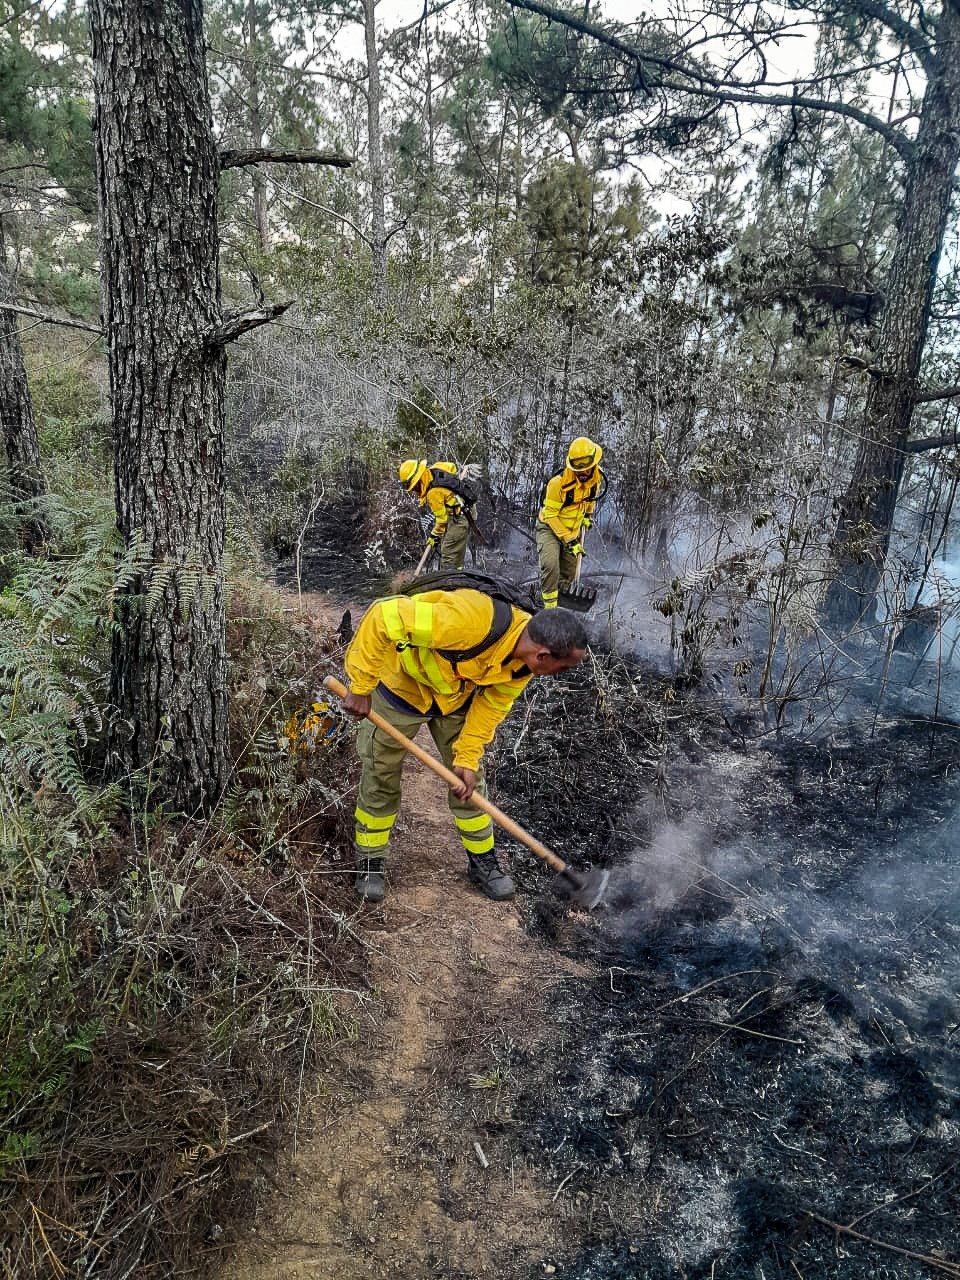 Easter Week: Several forest fires are recorded